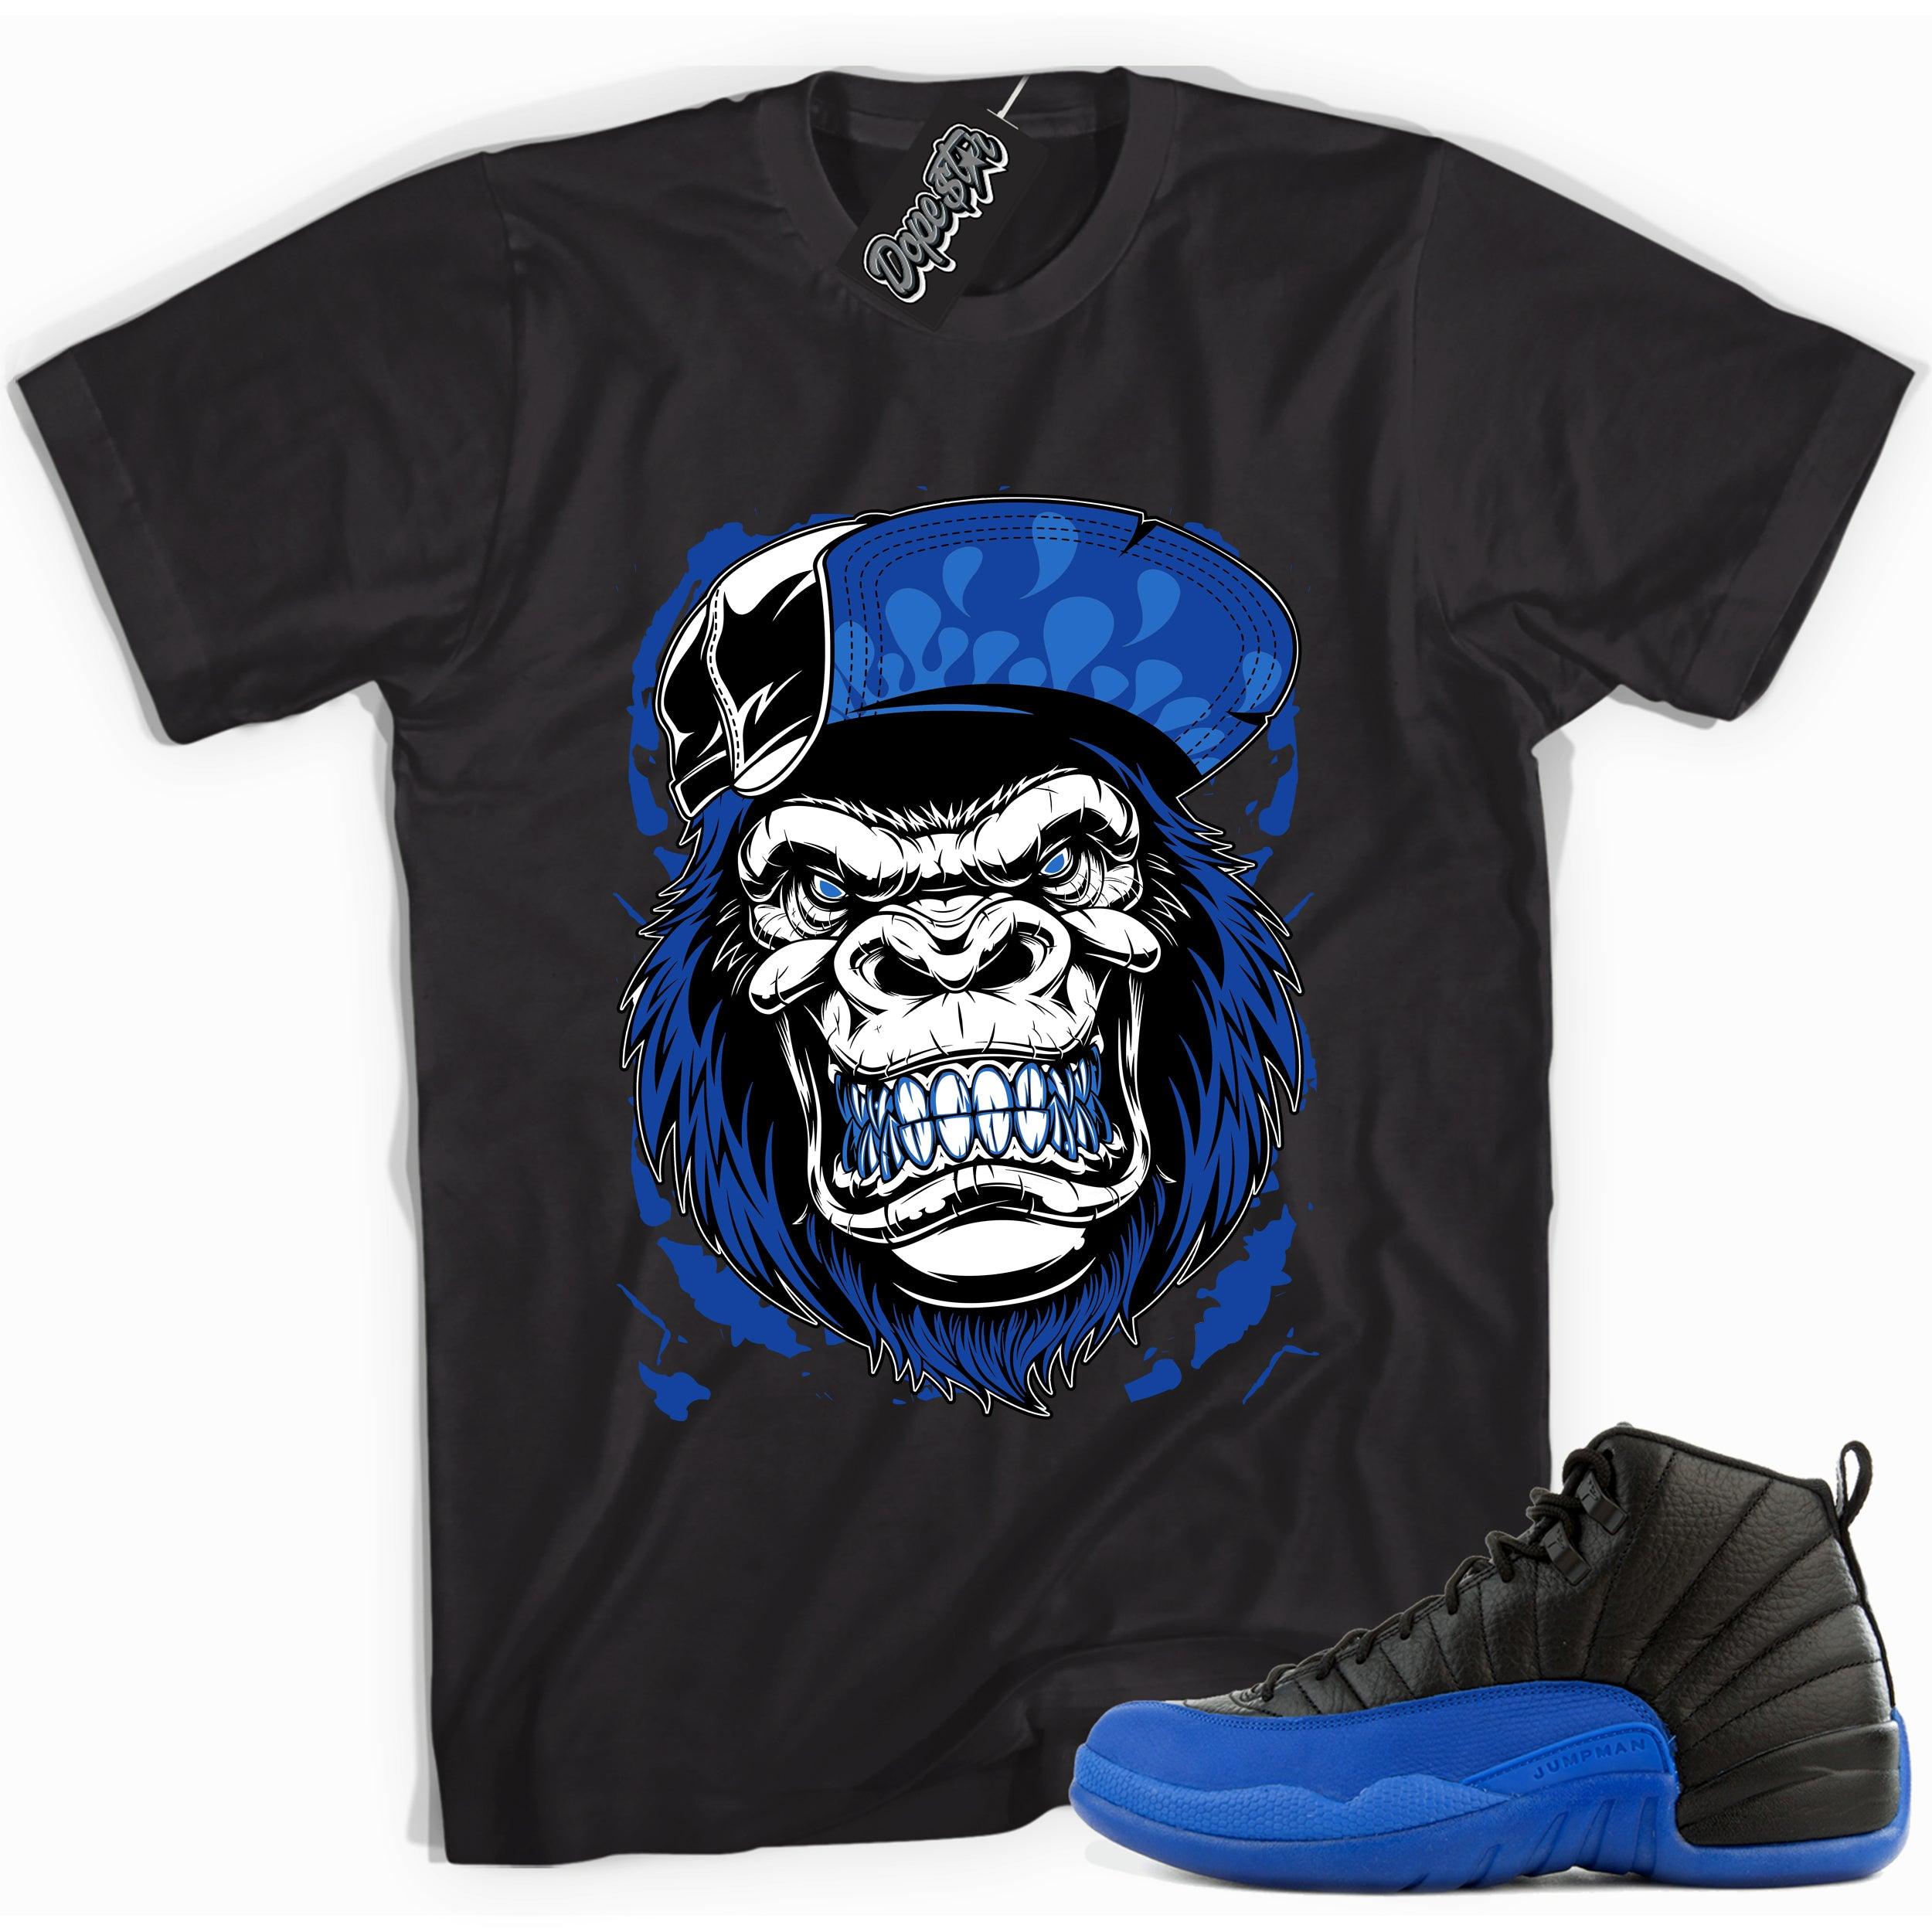 Cool black graphic tee with 'gorilla beast' print, that perfectly matches  Air Jordan 12 Retro Black Game Royal sneakers.